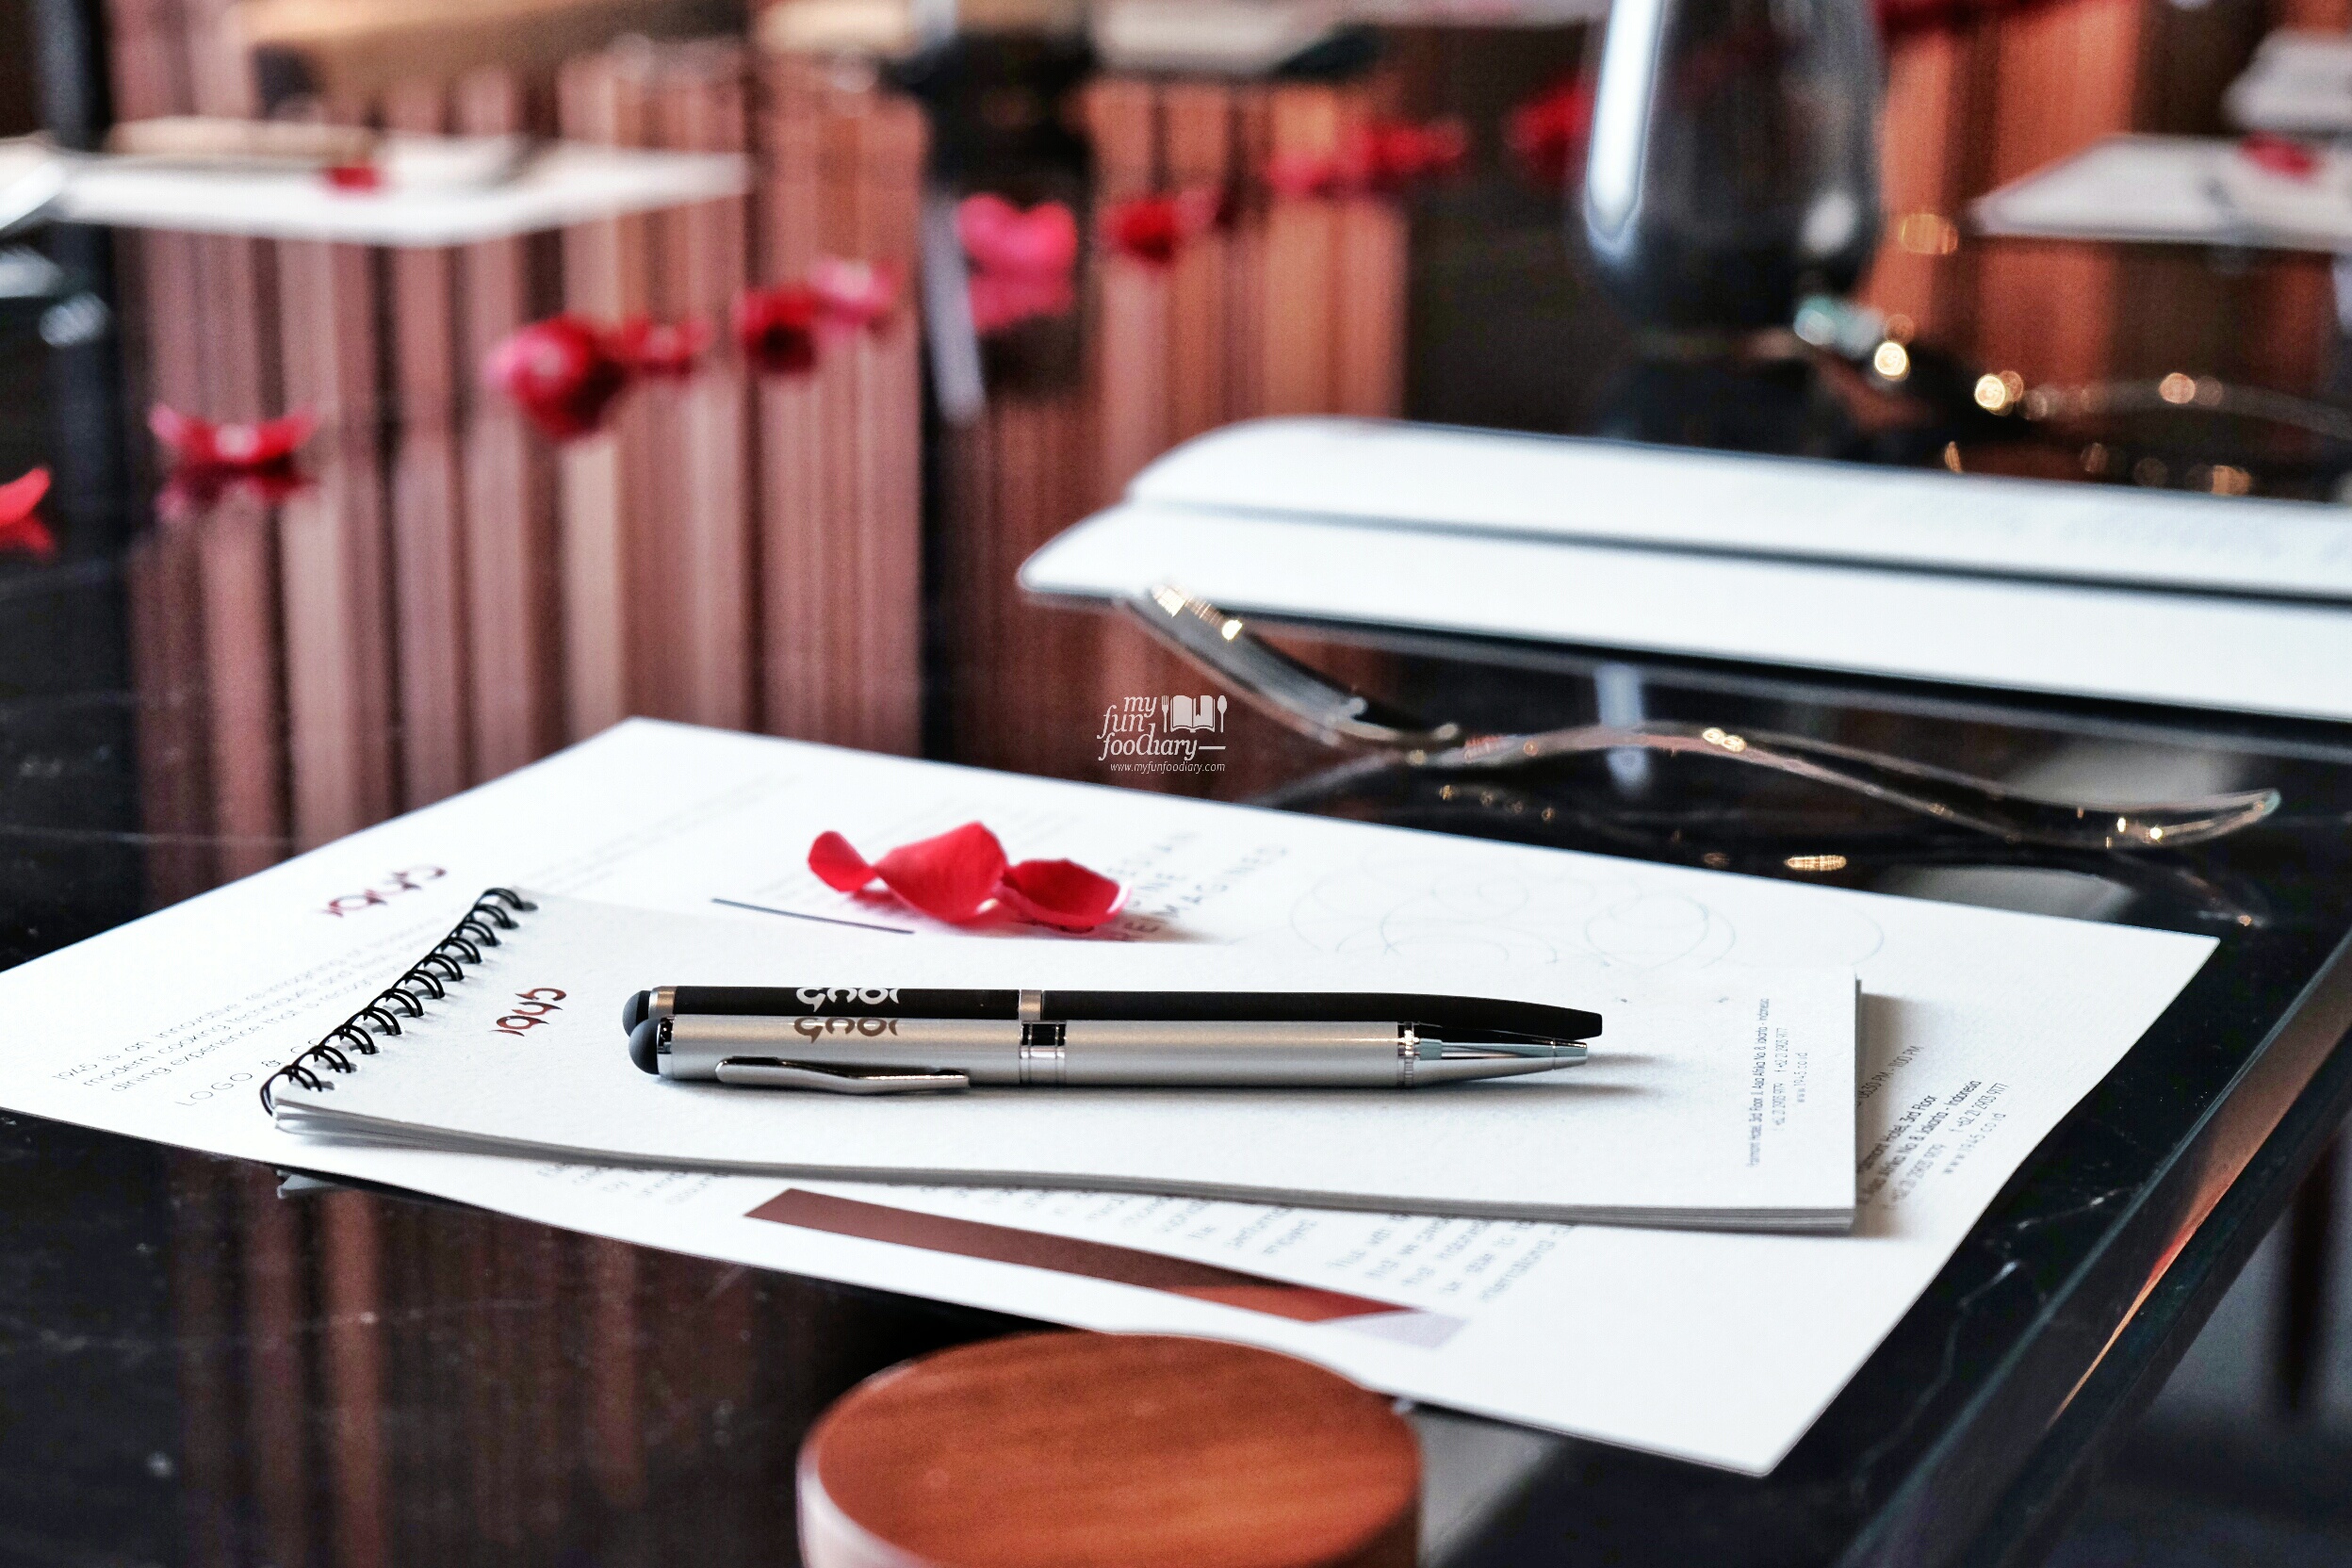 Custom Paper and Pen at 1945 Restaurant Fairmont Hotel Jakarta by Myfunfoodiary